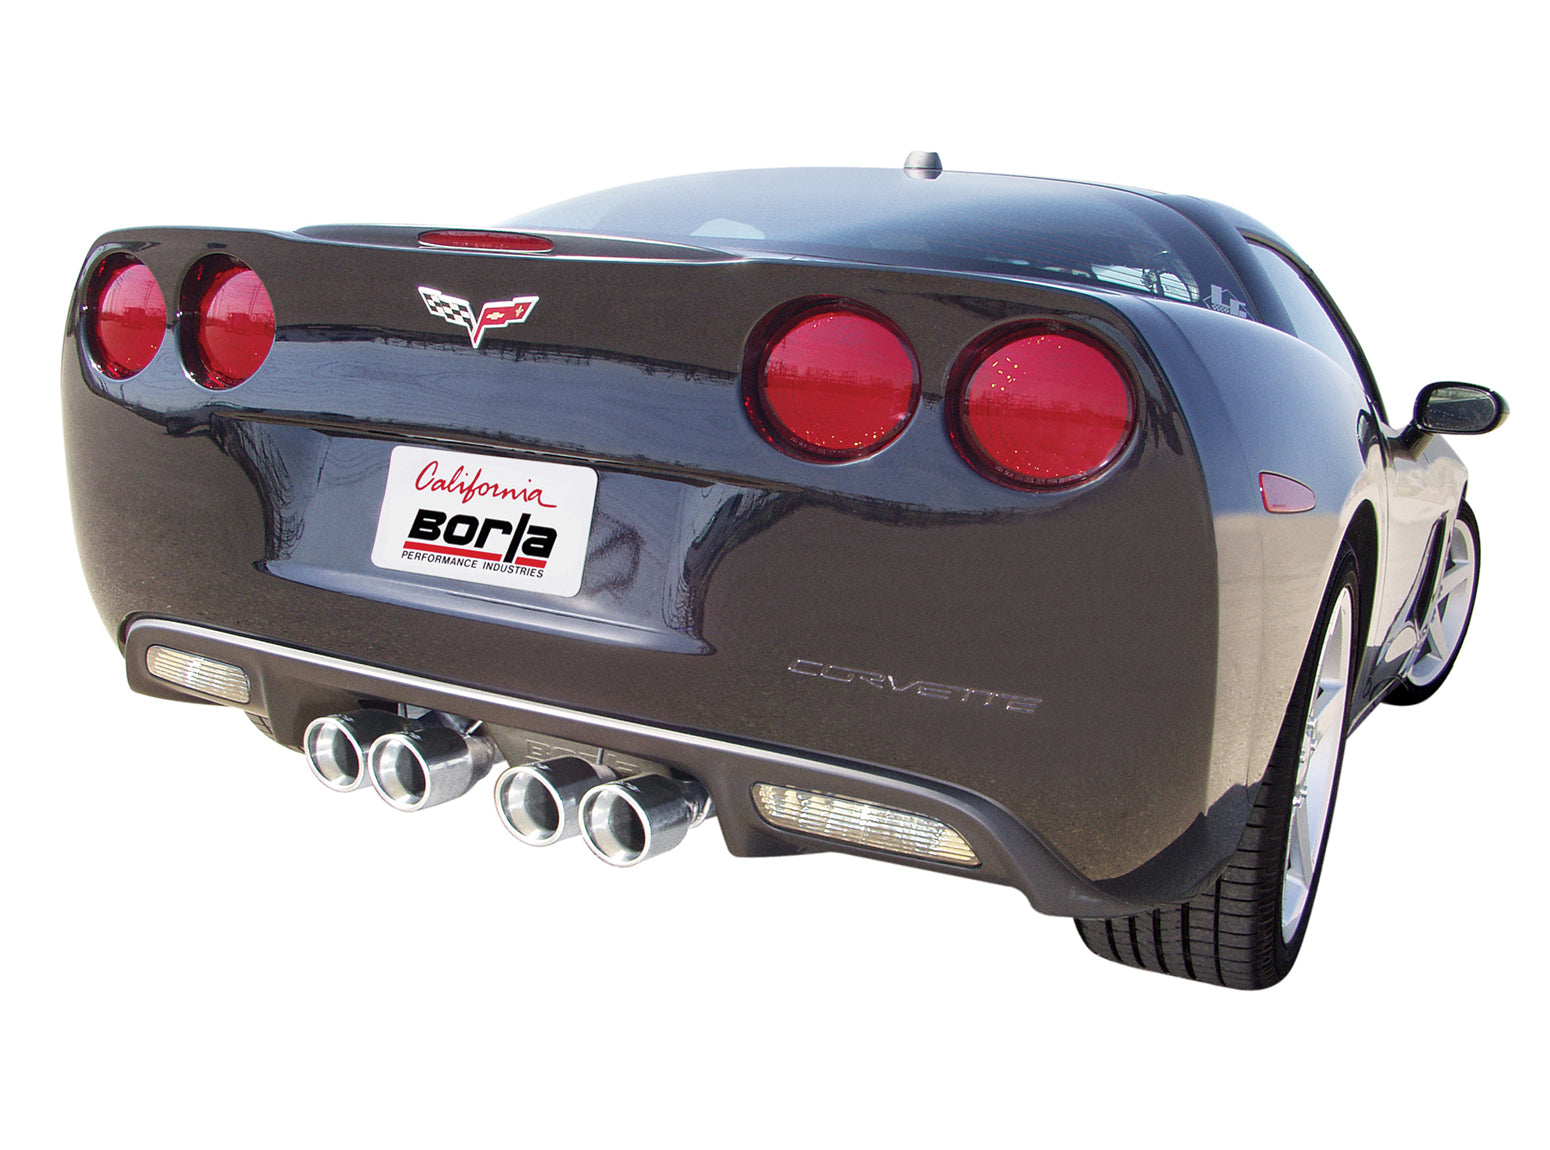 BORLA 60089 Exhaust System X-Pipes, Mid-Pipes, & Down-Pipes CORV 05 C6 6.0L V8 AT / MT RWD Photo-2 